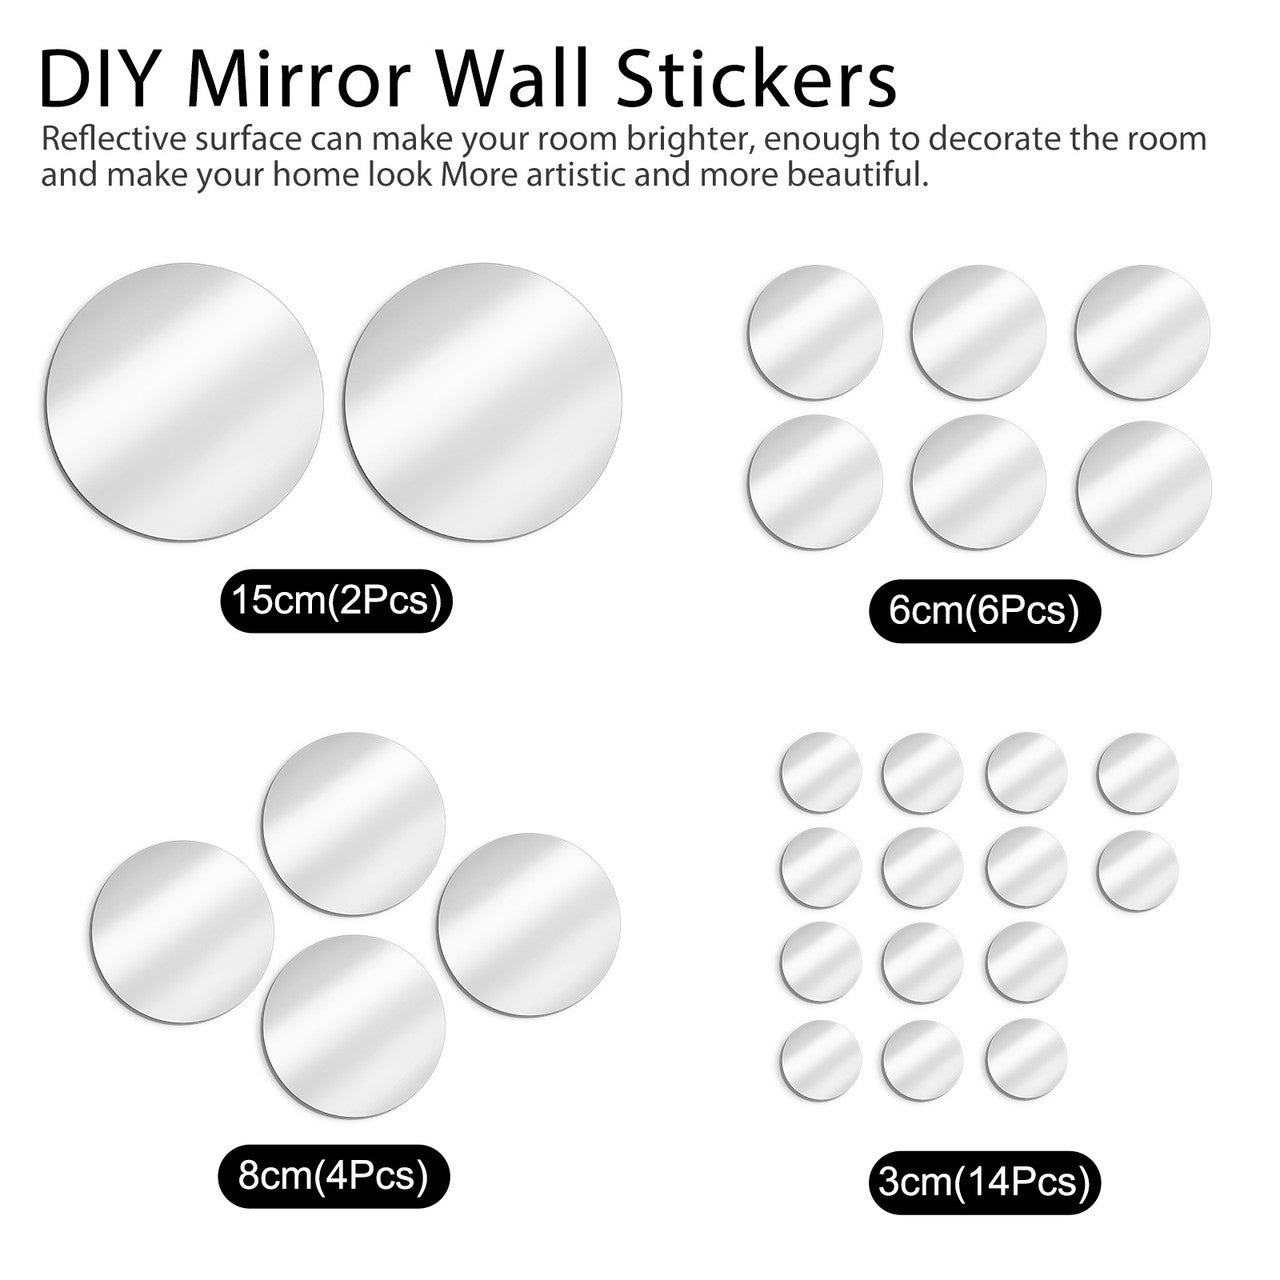 26 Pcs Removable Acrylic Mirror Wall Sticker - Adhesive Round Circle Mirror Tiles Decals for Home Living Room Bedroom Decor ( 4 different sizes)